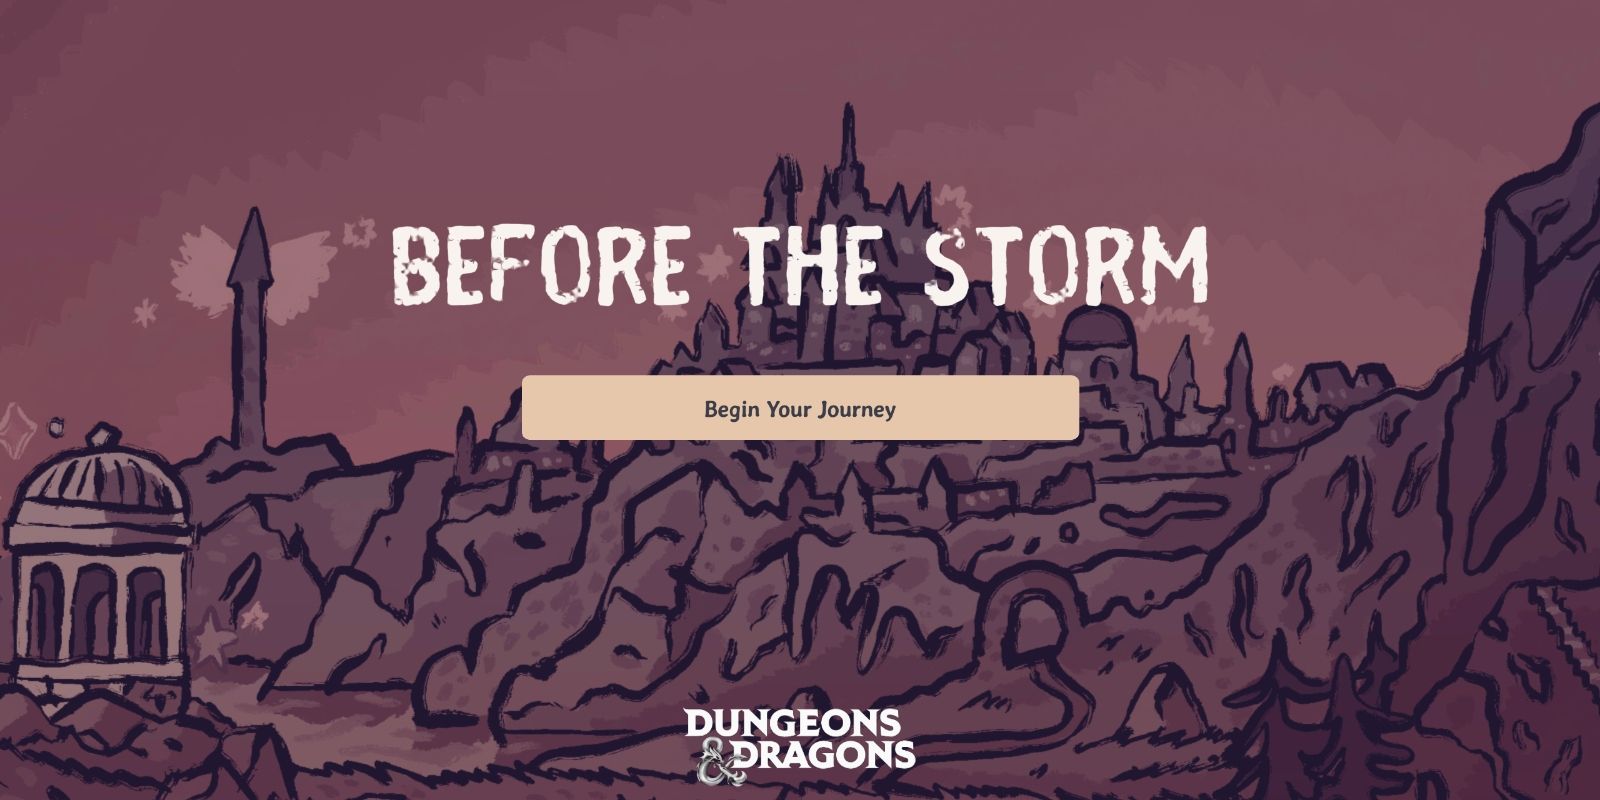 Starting screen for D&D Beyond's Before the Storm